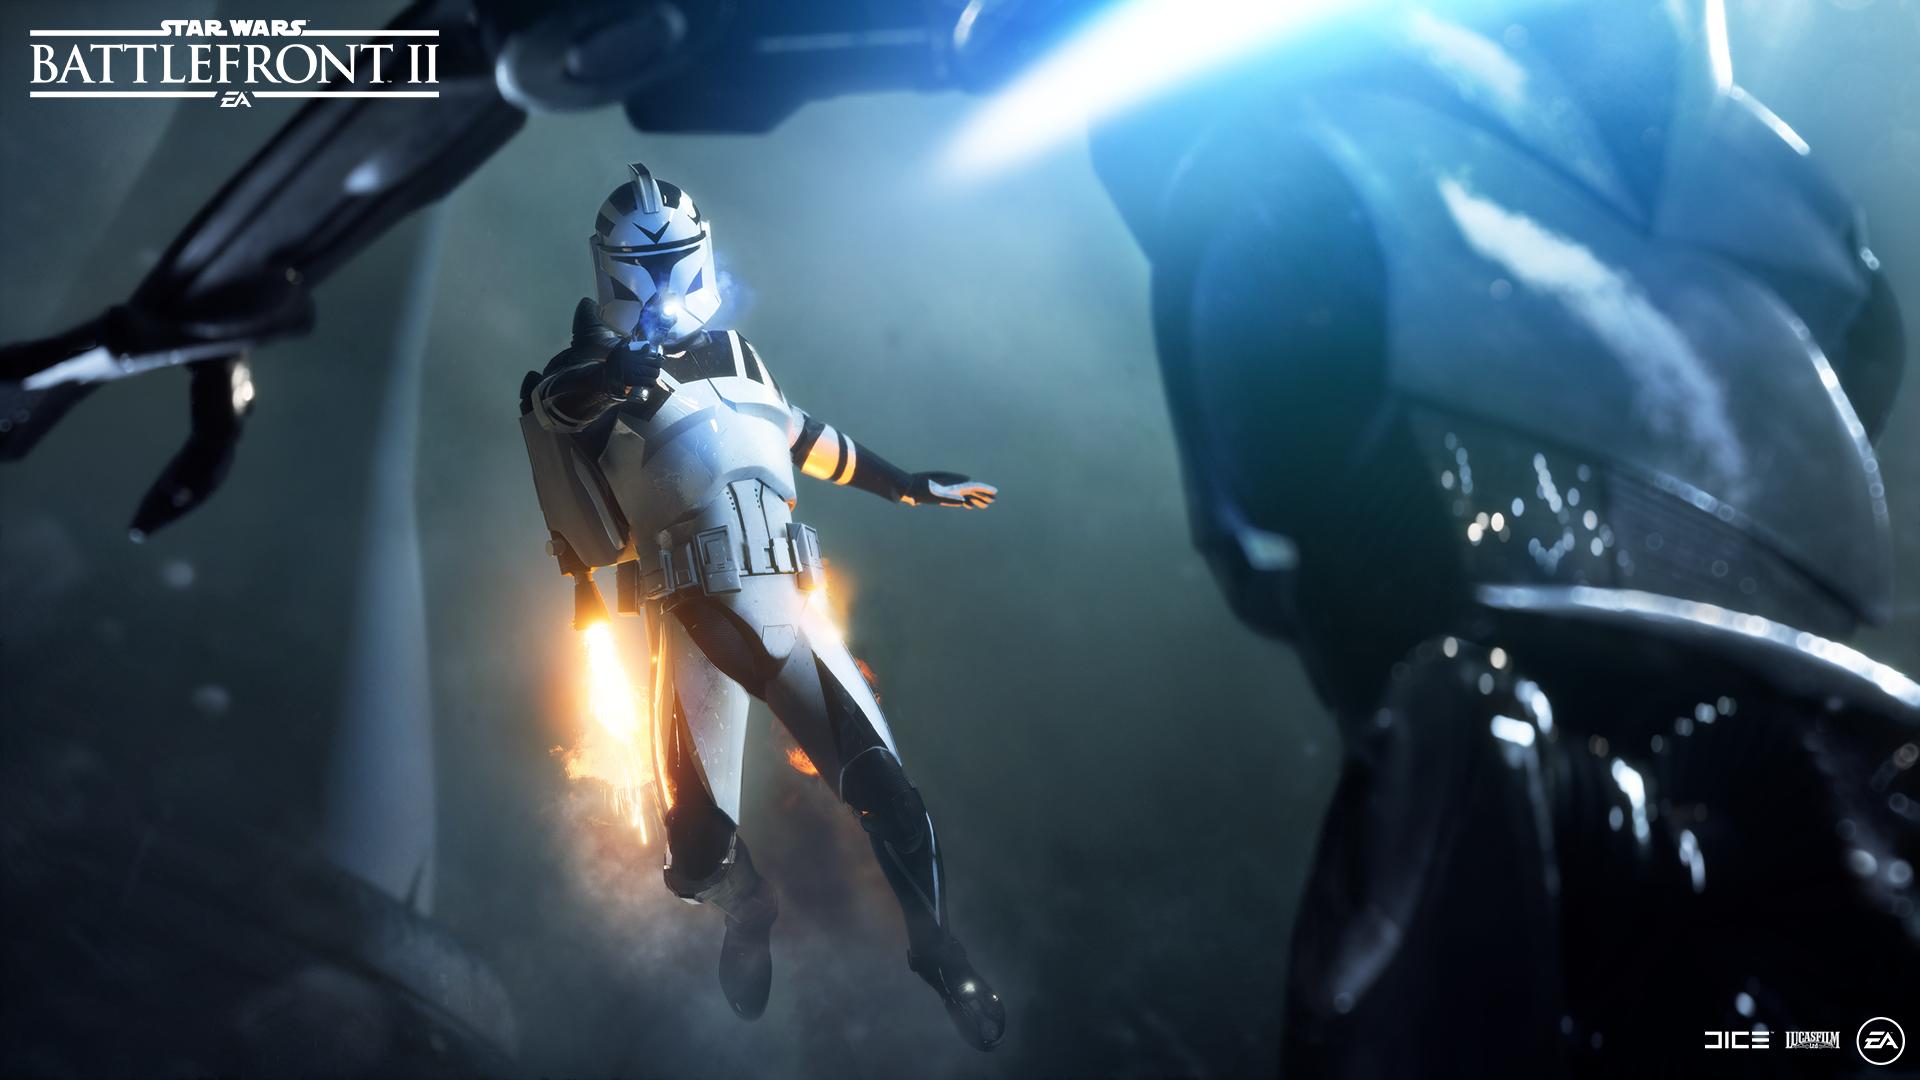 EA Star Wars Siege of Kamino Update deploys tomorrow in #StarWarsBattlefrontII! Read all the changes here